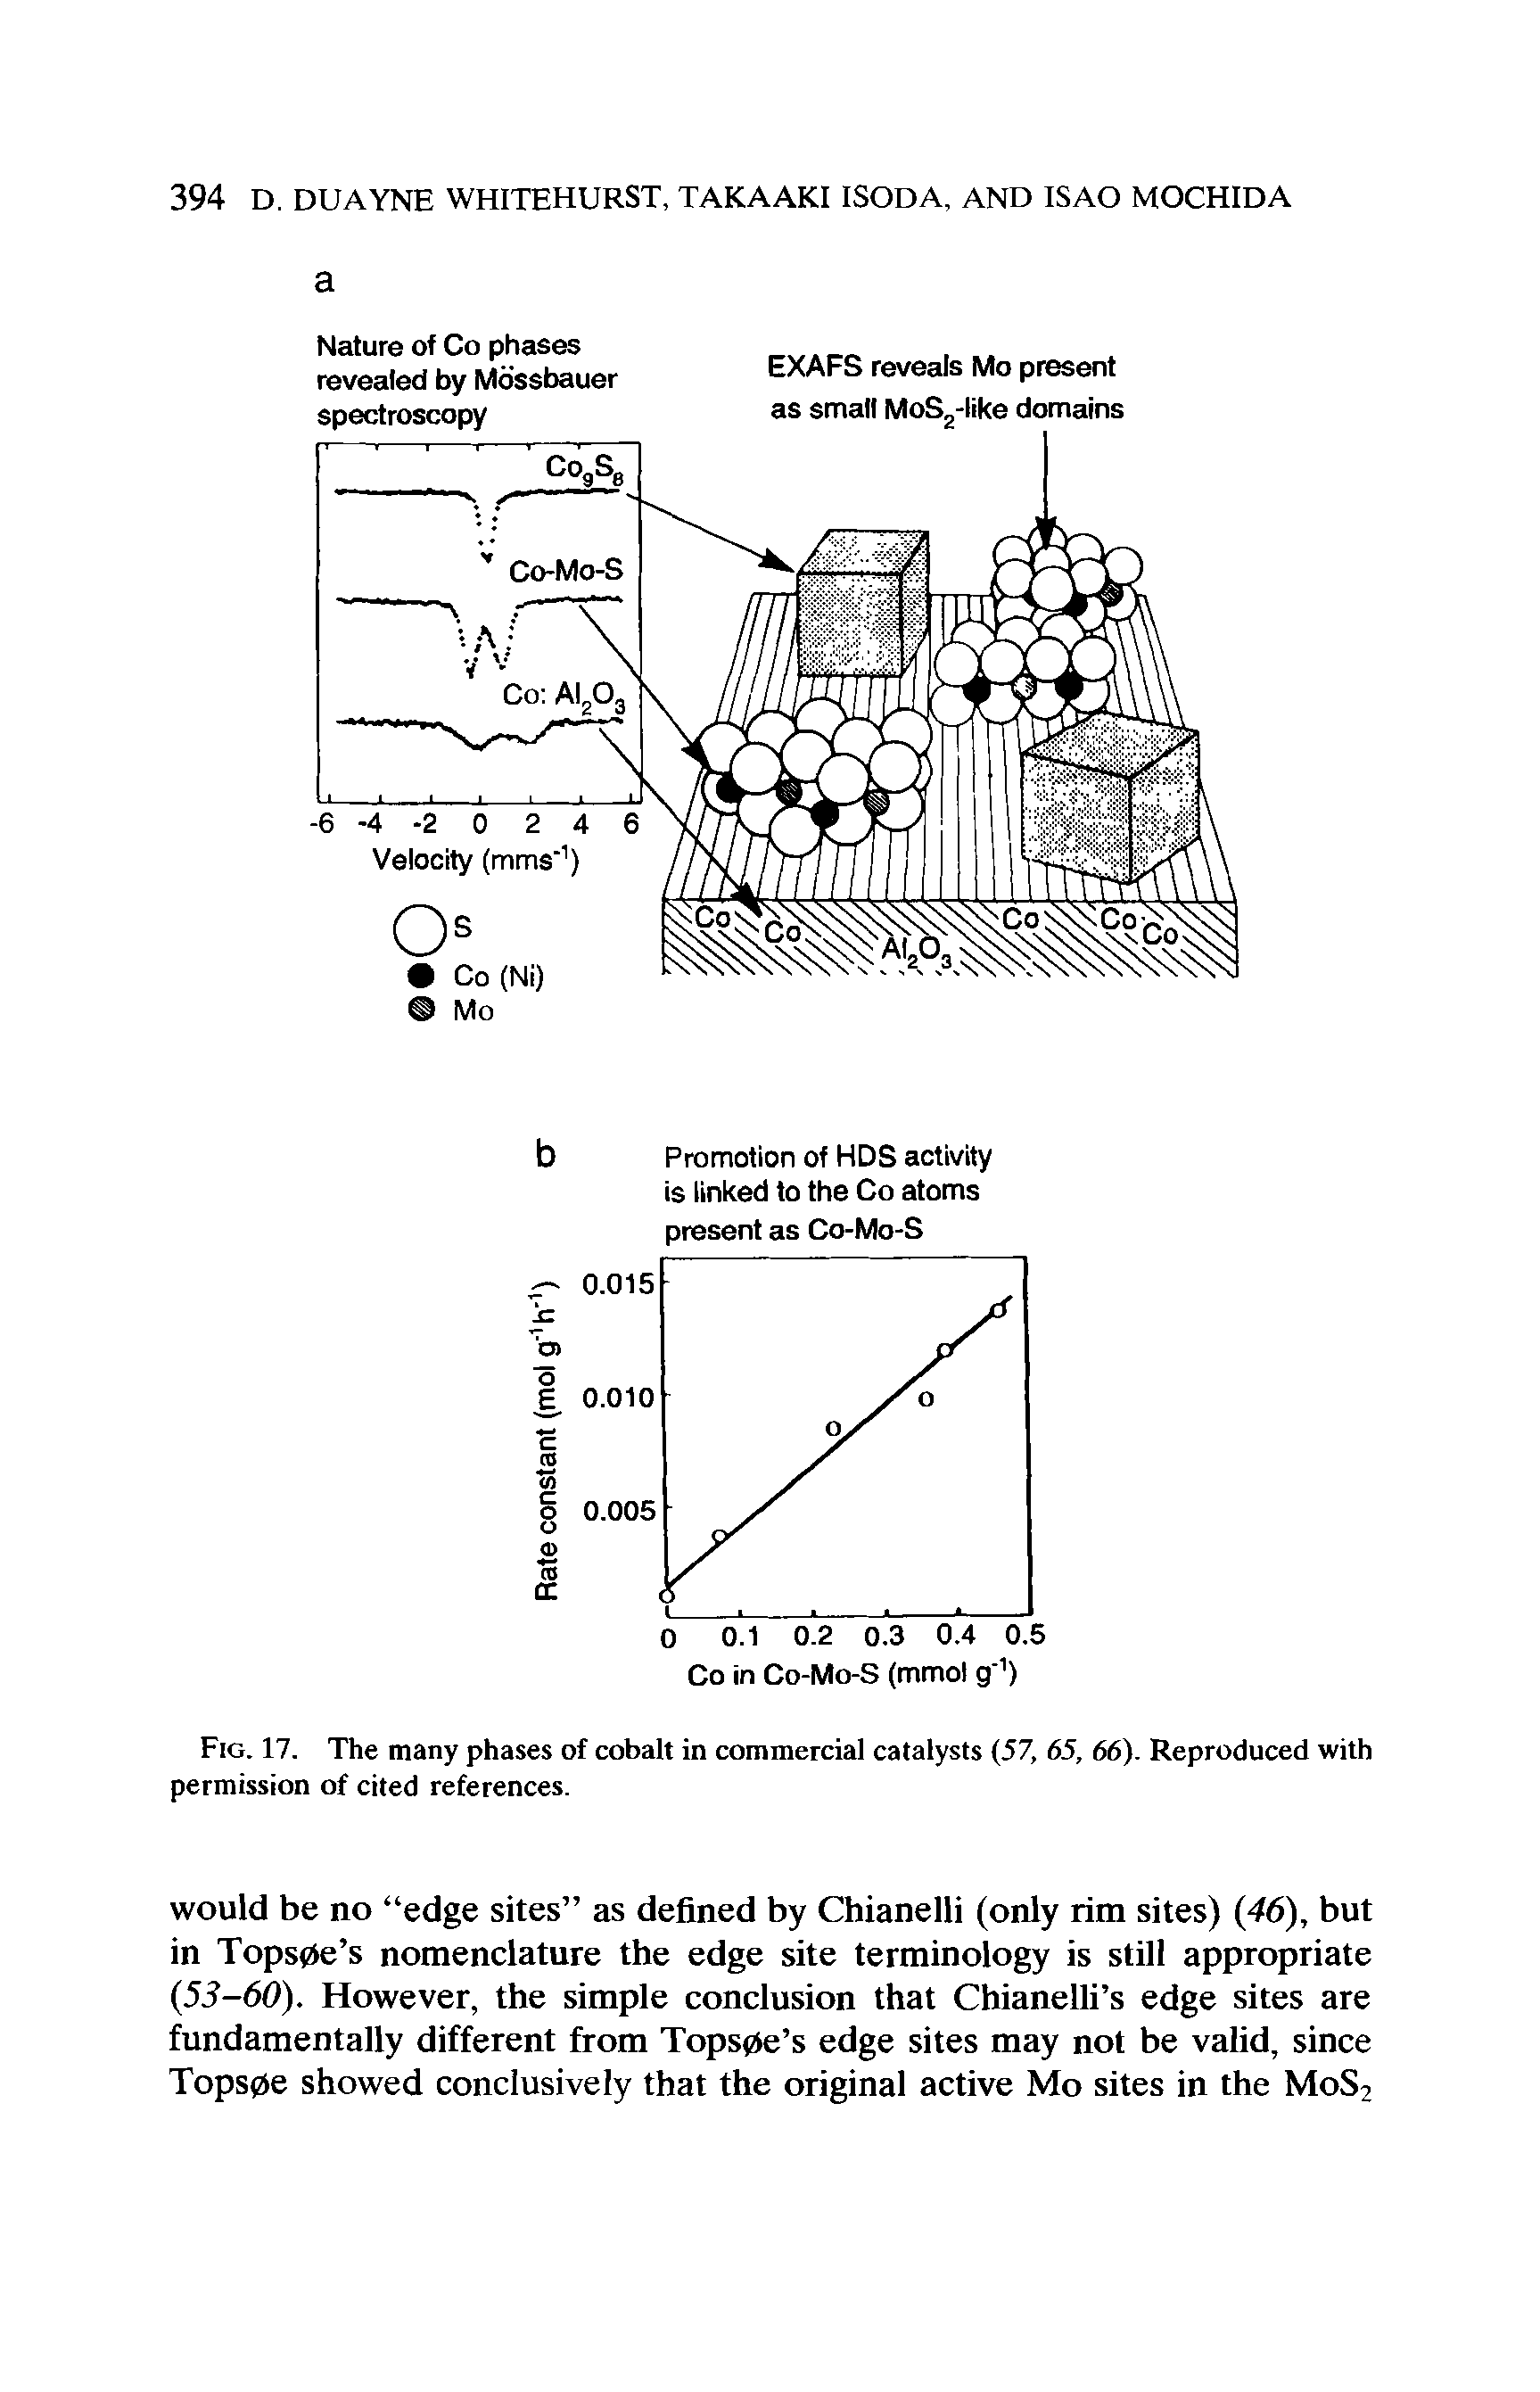 Fig. 17. The many phases of cobalt in commercial catalysts (57, 65, 66). Reproduced with permission of cited references.